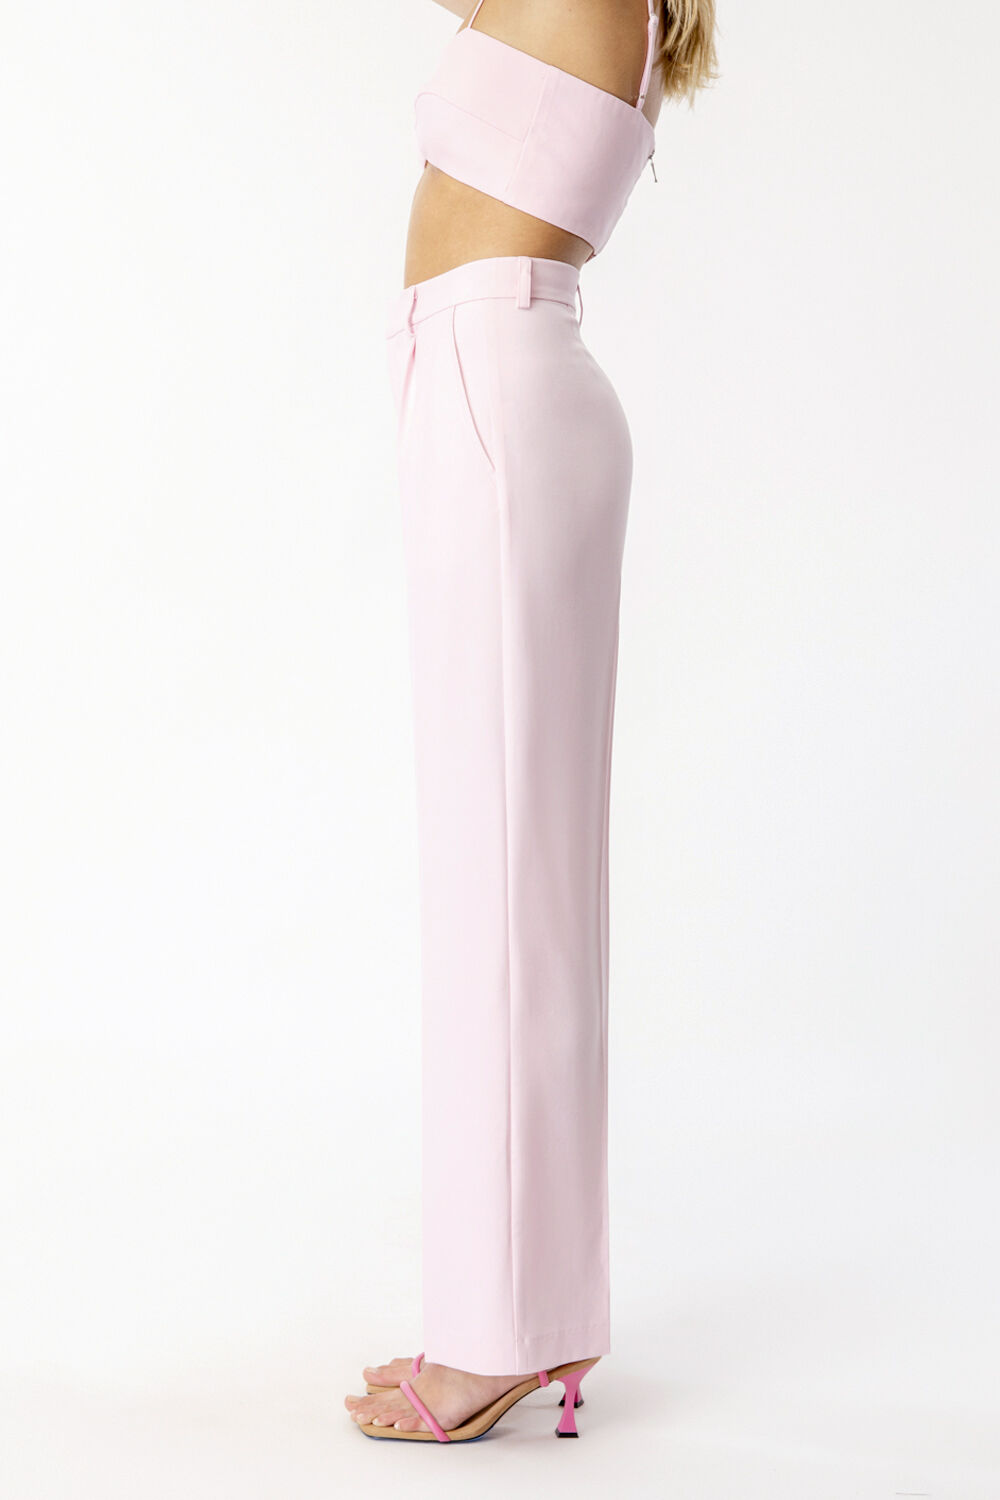 MAISON STRAIGHT LEG PANT in colour SOFT PINK